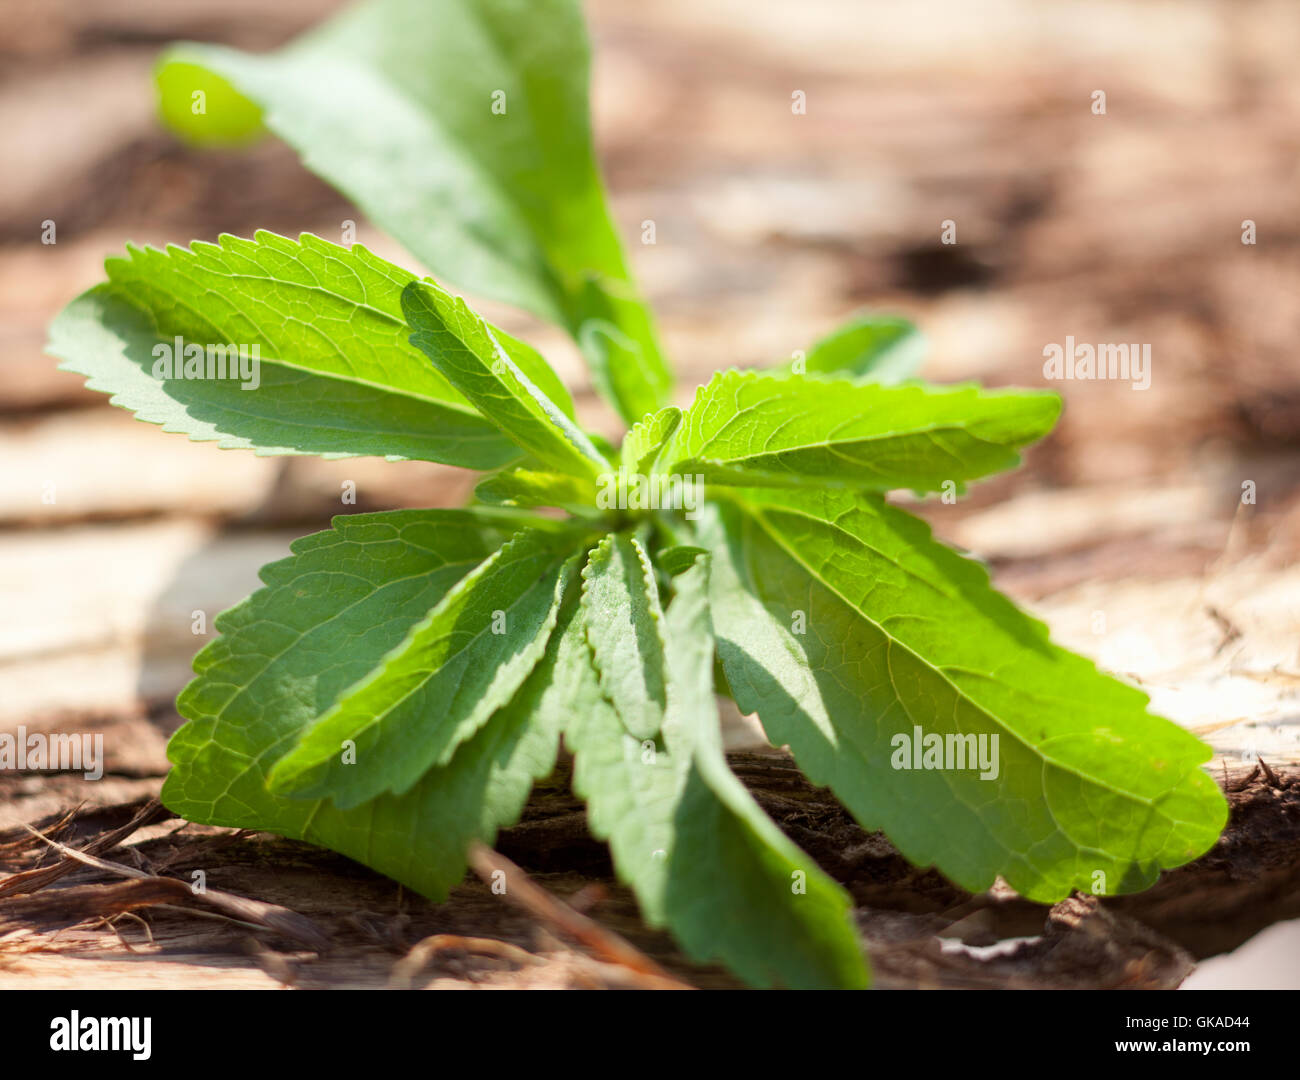 sweet new leaves Stock Photo